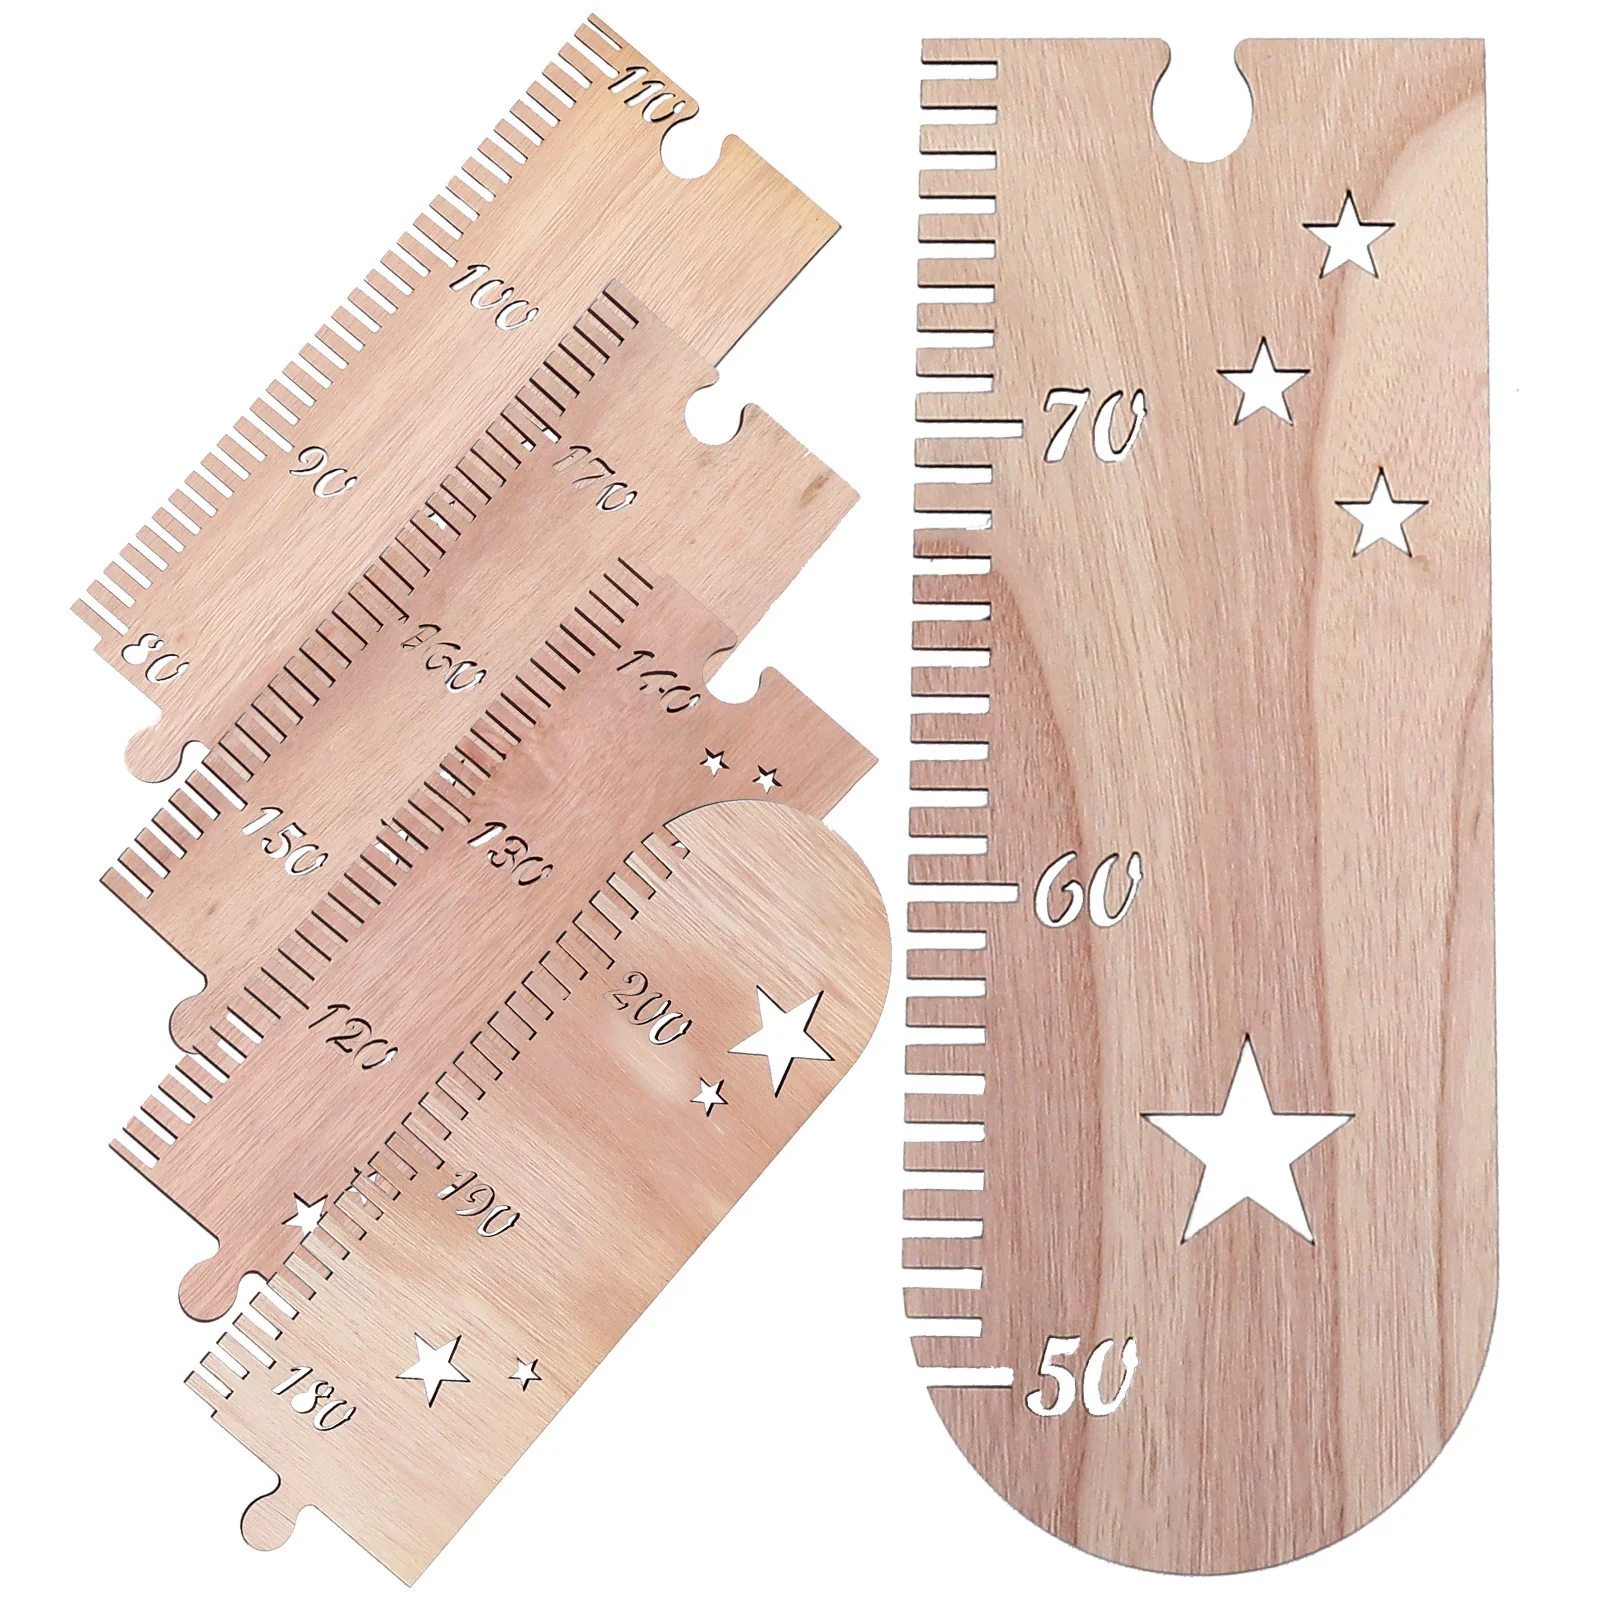 

Children's Height Ruler Kids Growth Chart Wall Room Decor Wood Measuring for Nursery